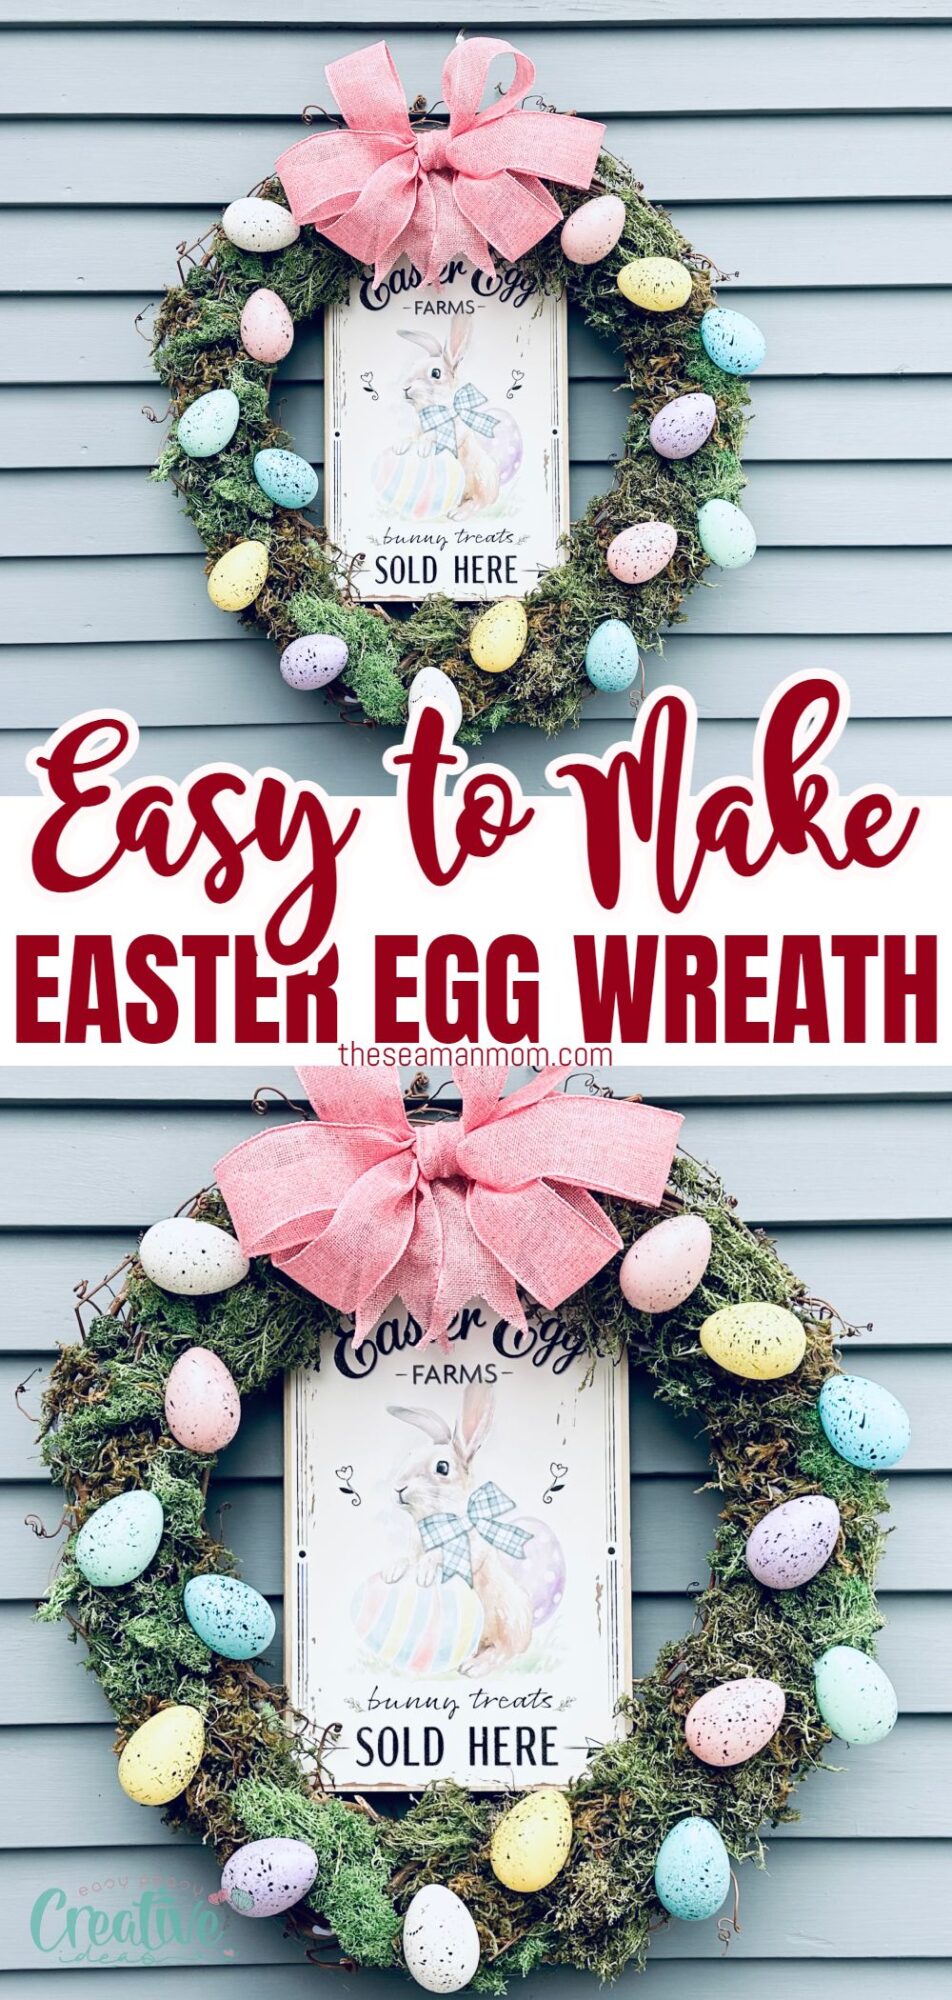 Vibrant DIY Easter egg wreath featuring eggs and a sign, a cheerful addition to your home décor.